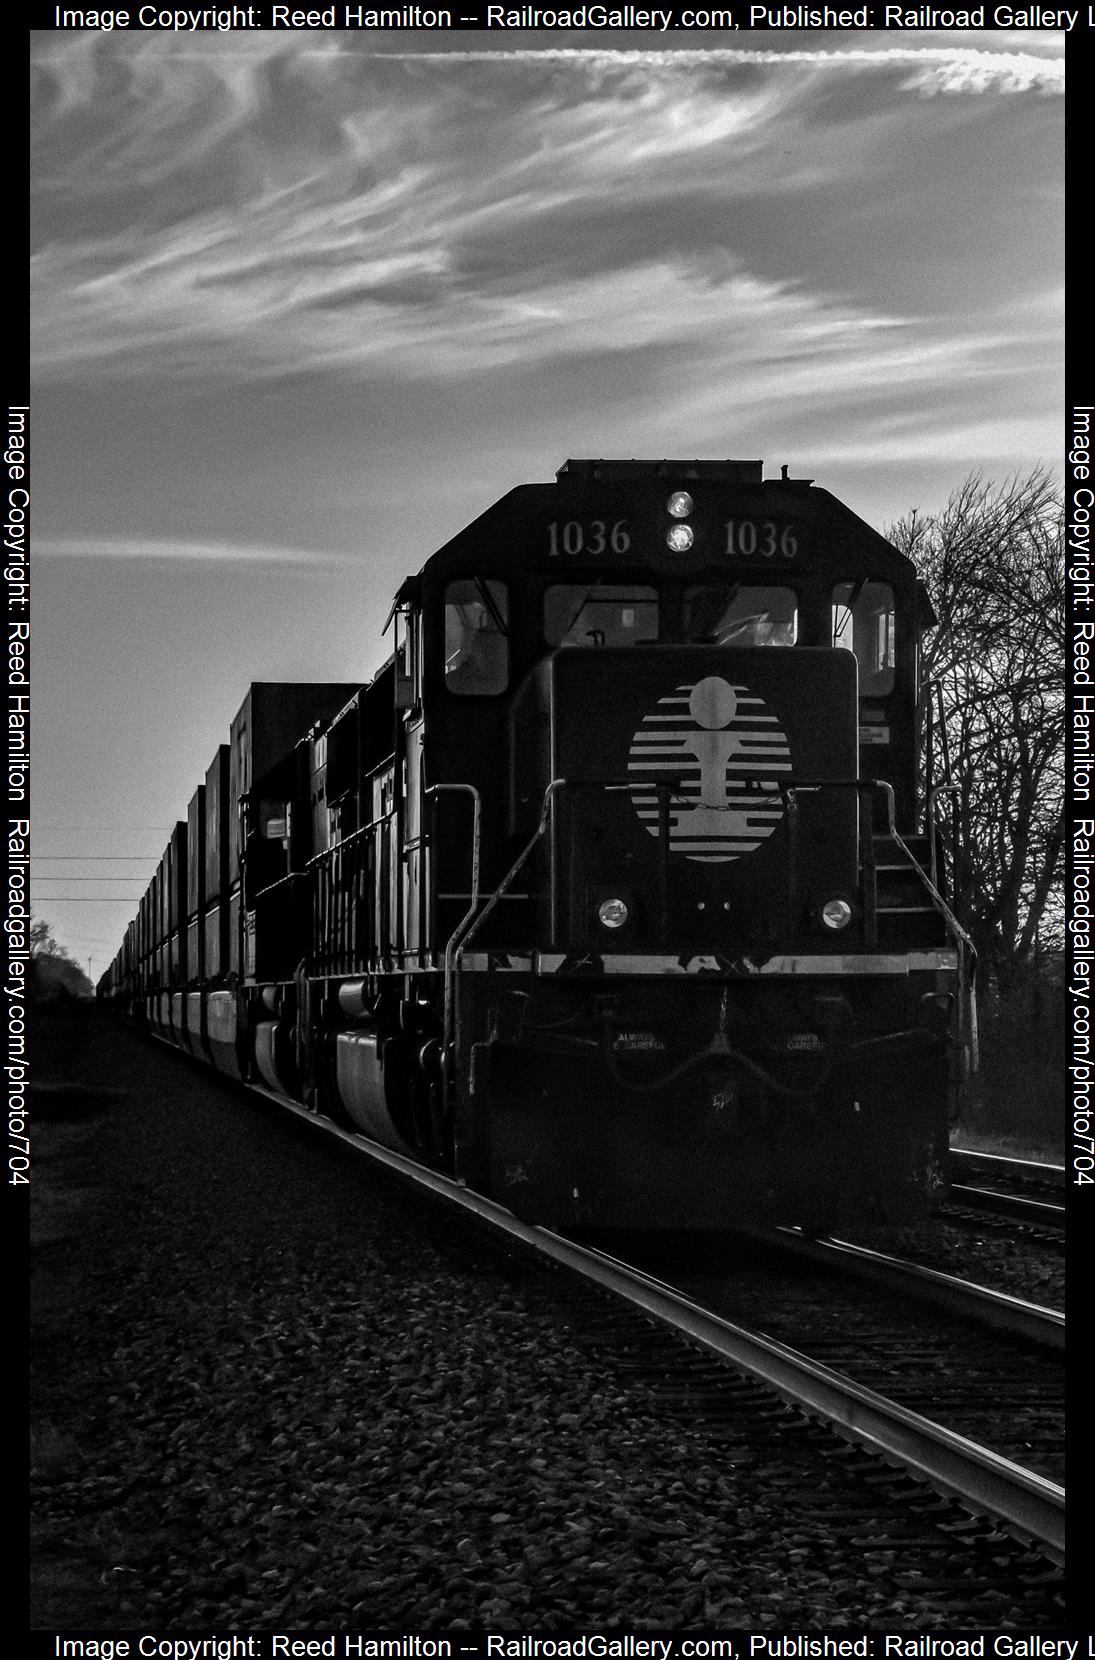 IC 1036 is a class EMD SD70 and  is pictured in South Bend, IN, United States.  This was taken along the South Bend Sub on the Illinois Central Railroad. Photo Copyright: Reed Hamilton uploaded to Railroad Gallery on 02/18/2023. This photograph of IC 1036 was taken on Sunday, March 13, 2022. All Rights Reserved. 